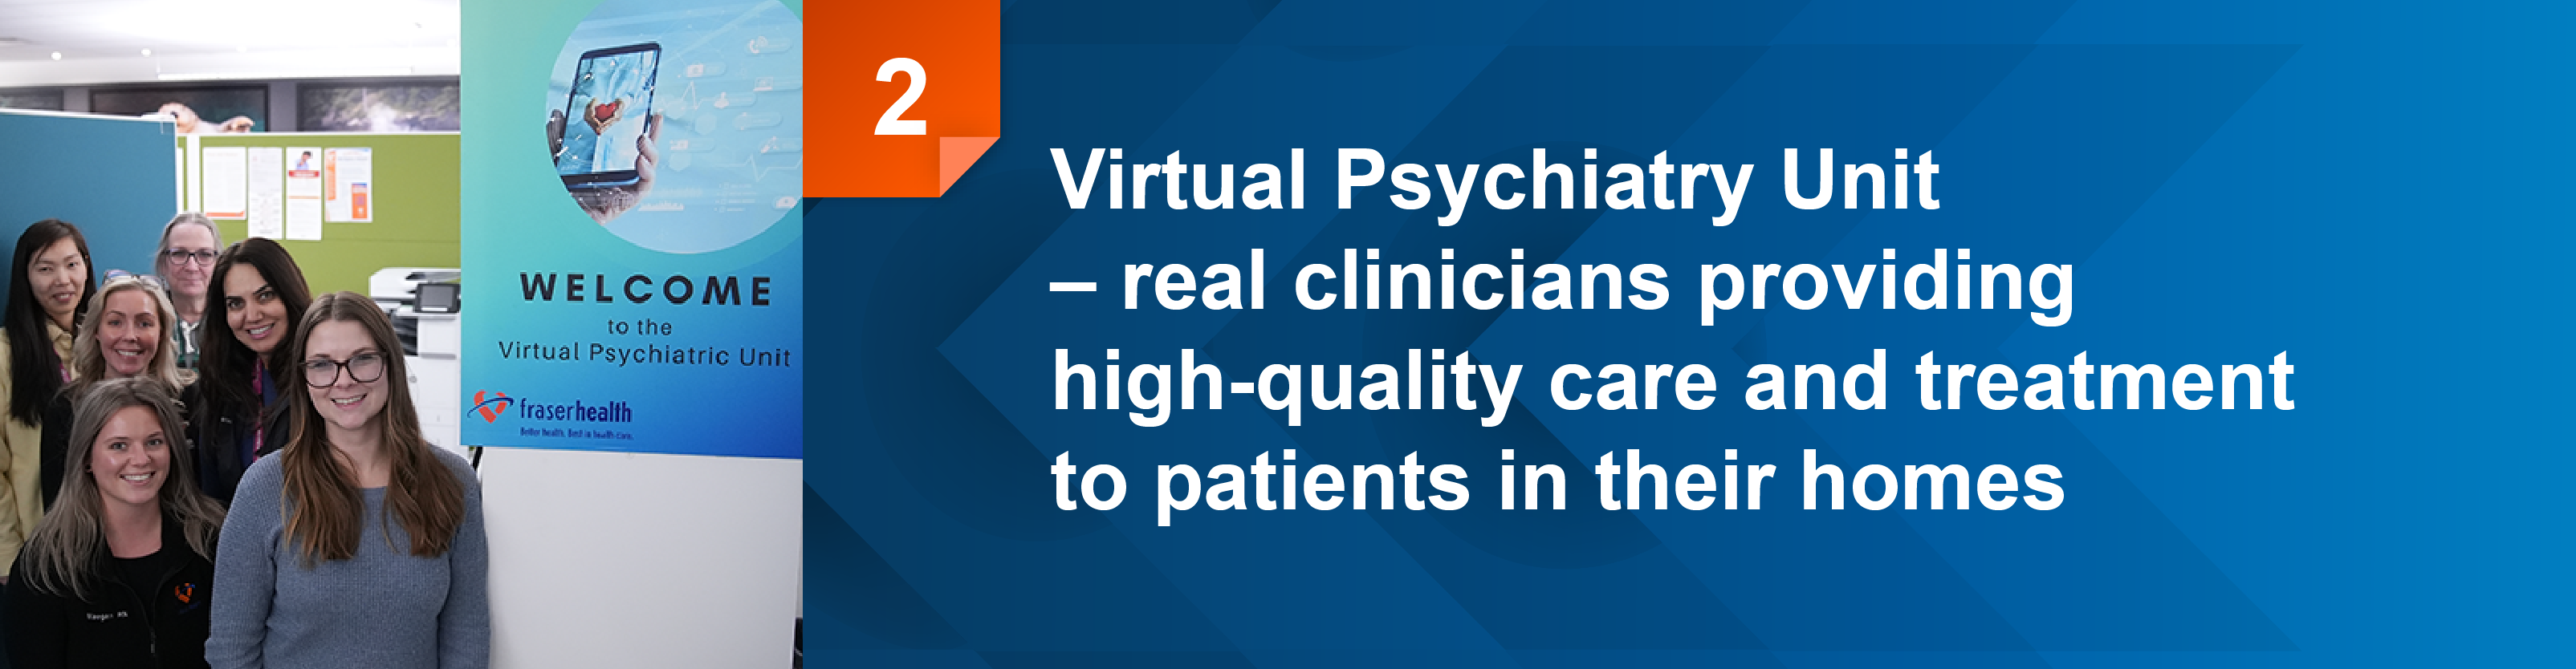 Virtual Psychiatry Unit Real clinicians providing high-quality care and treatment to patients in their homes